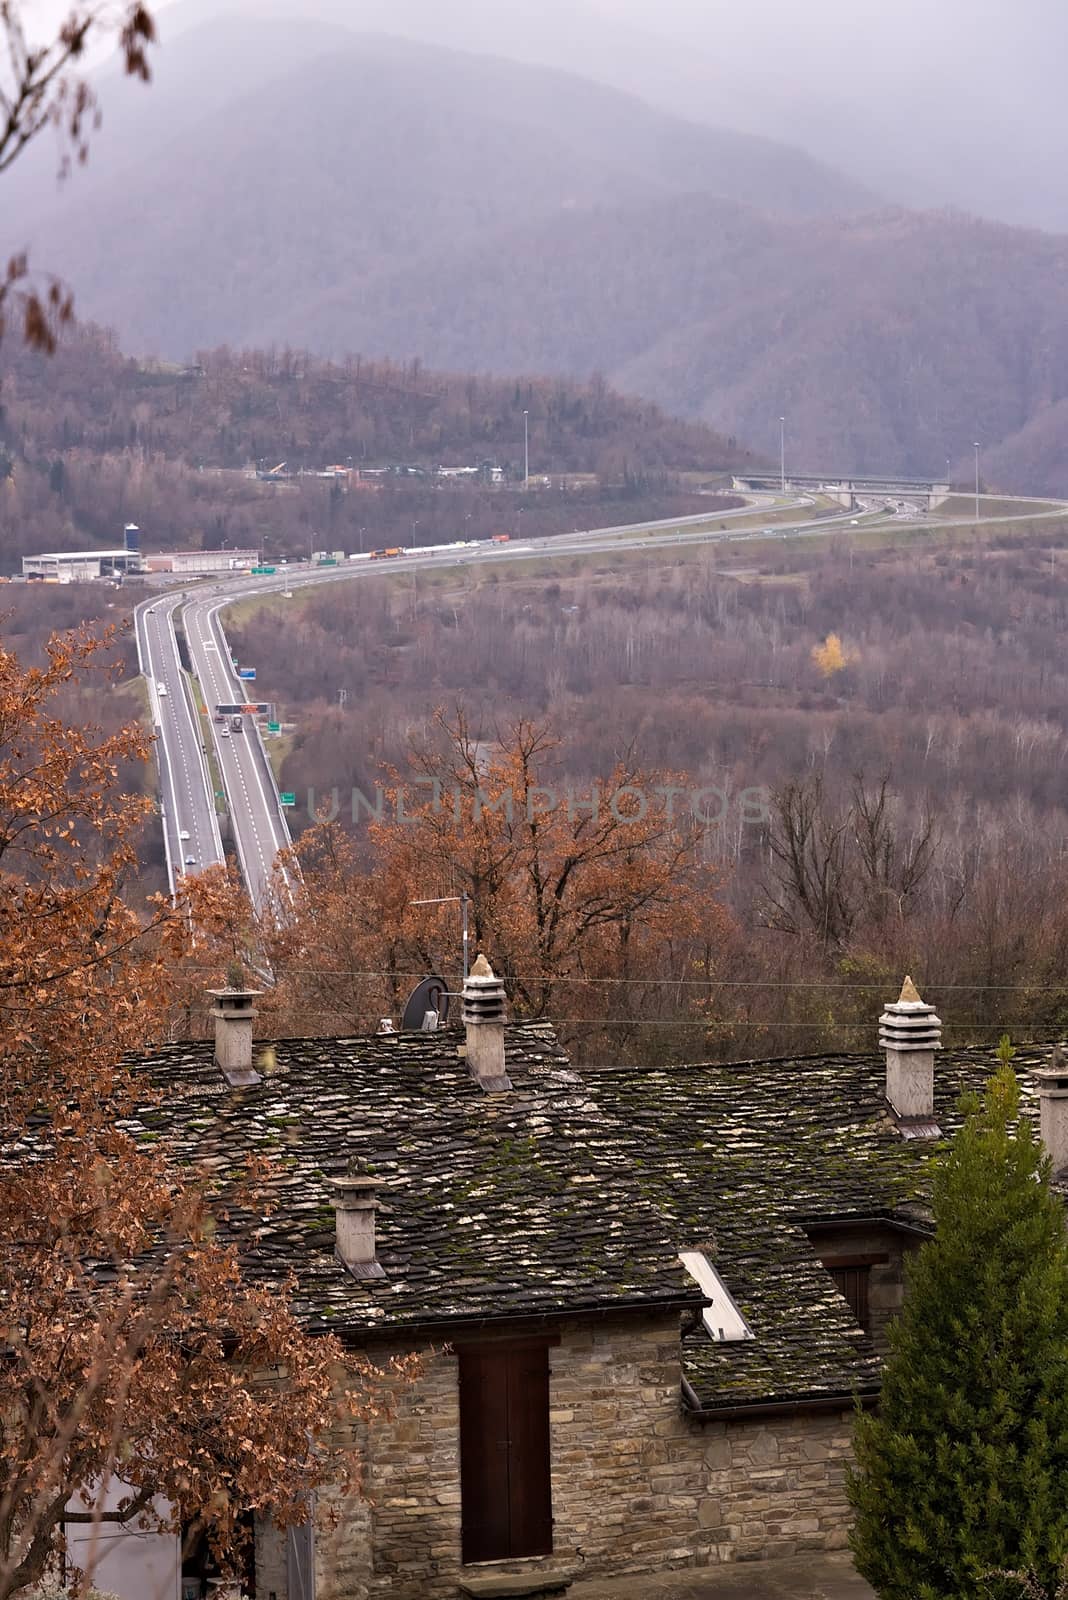 Parma, Emilia R. About 12/2015. Highway of the Cisa. Asphalt strip running through the mountains of Tuscany and Emilia. Stone house and trees with yellow leaves.